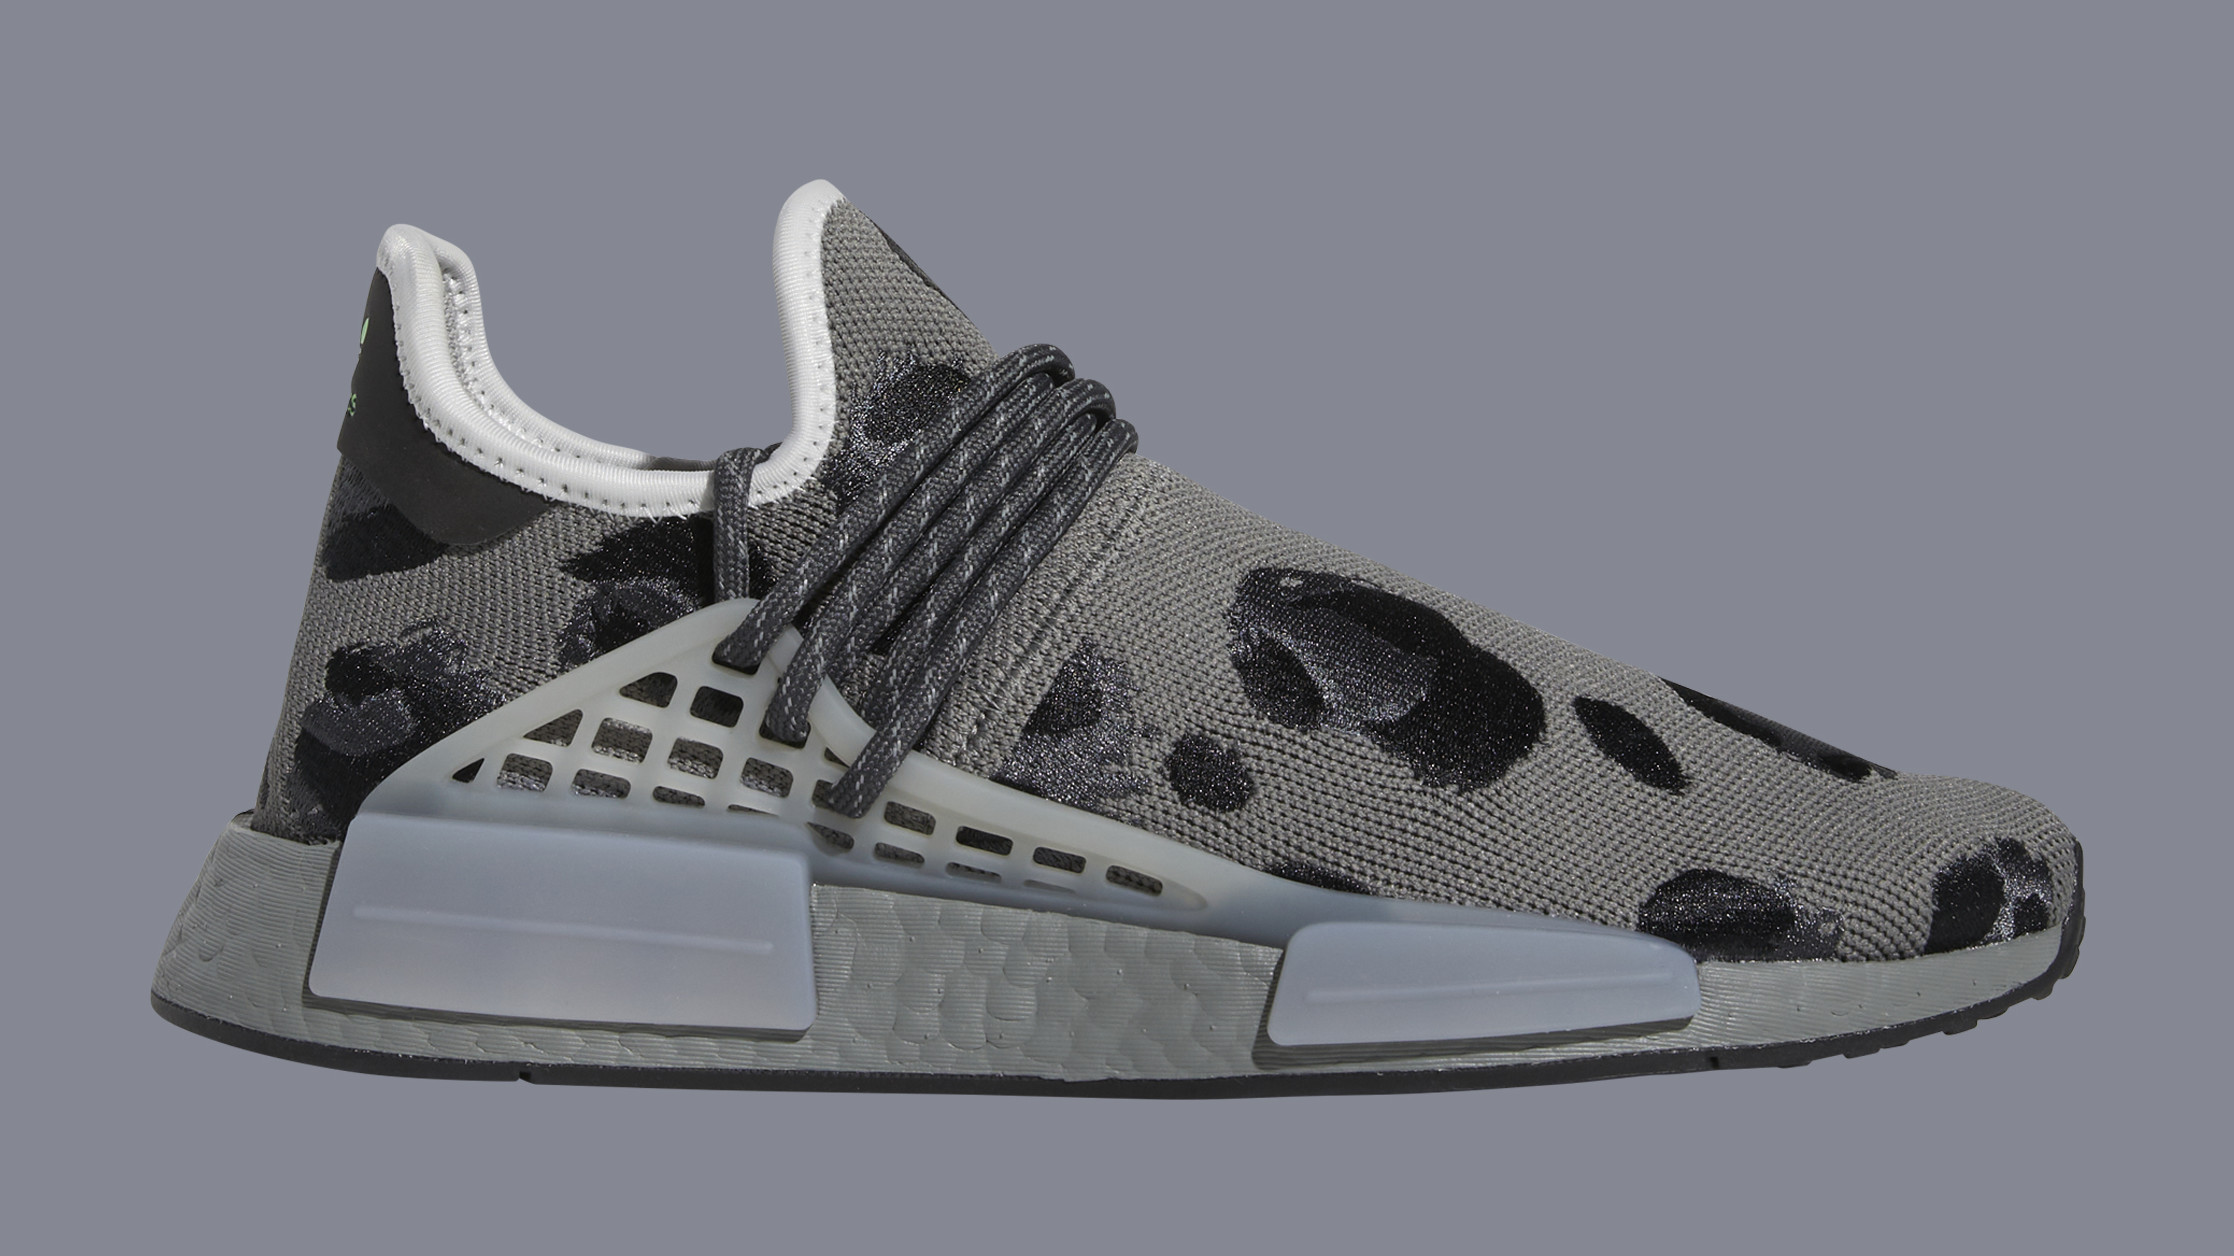 Another 'Animal Print' Pharrell x Adidas NMD Hu Colorway Is Releasing Soon